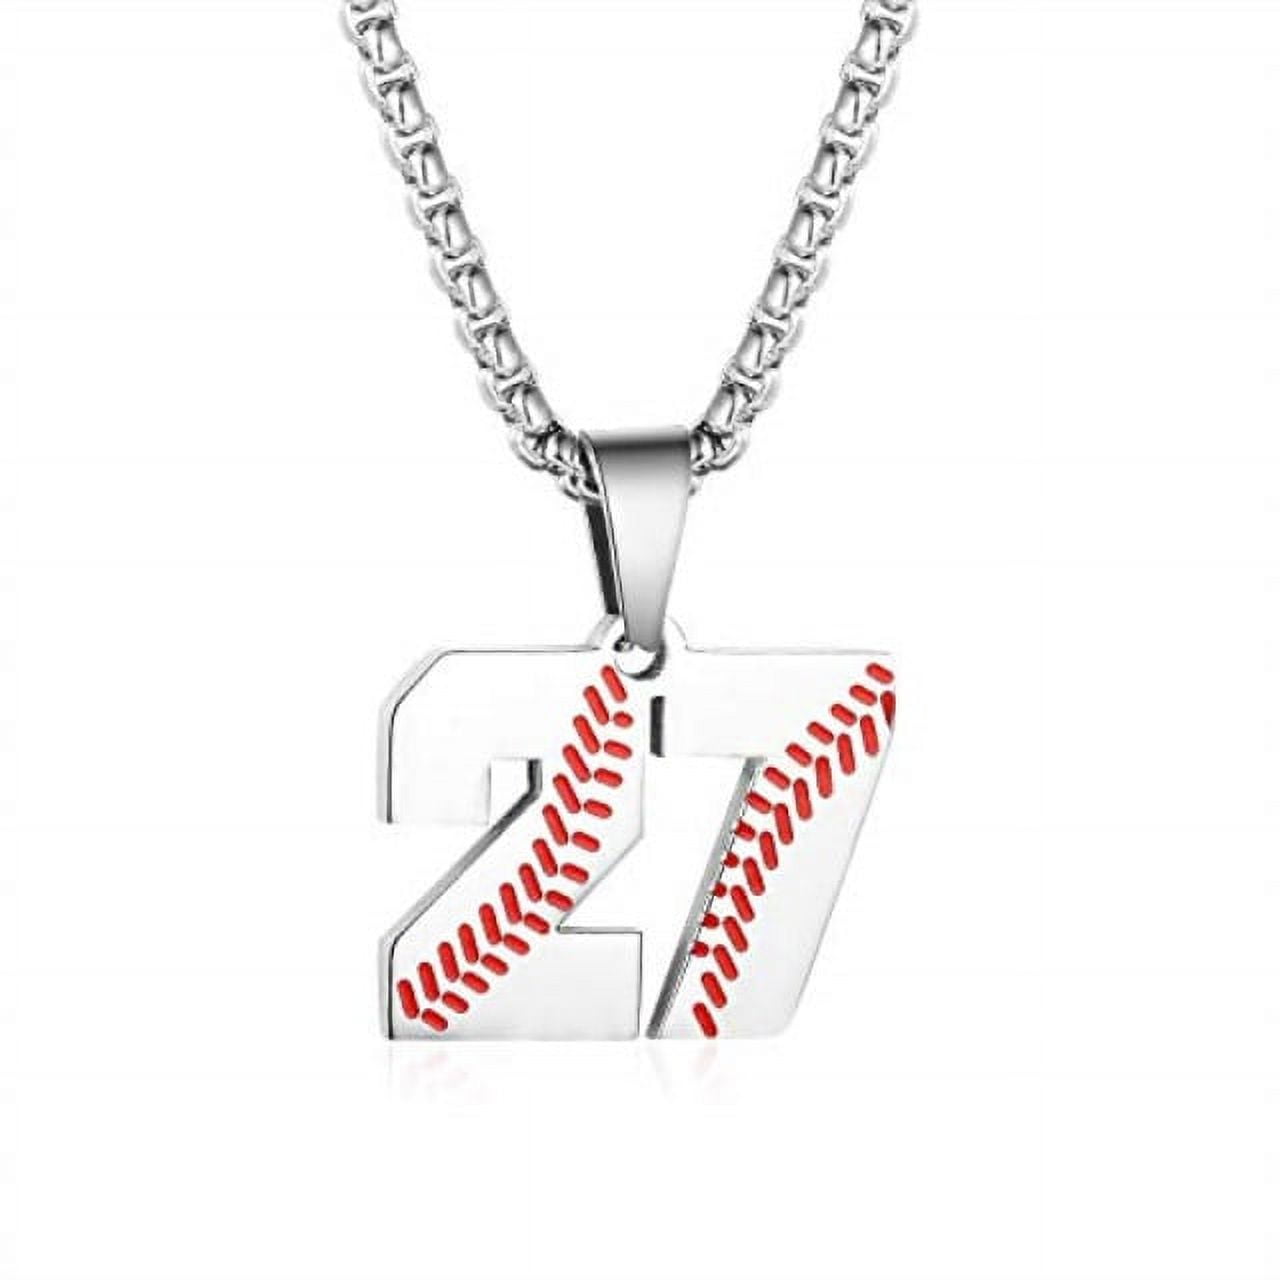 Lucky Number Necklace, 23, Sport Number Necklace, Angel Numbers, Year of  Graduation, Name Necklace, Baseball-football Number Pendant for Men - Etsy  | Number necklace, Sports number necklace, Mens pendant